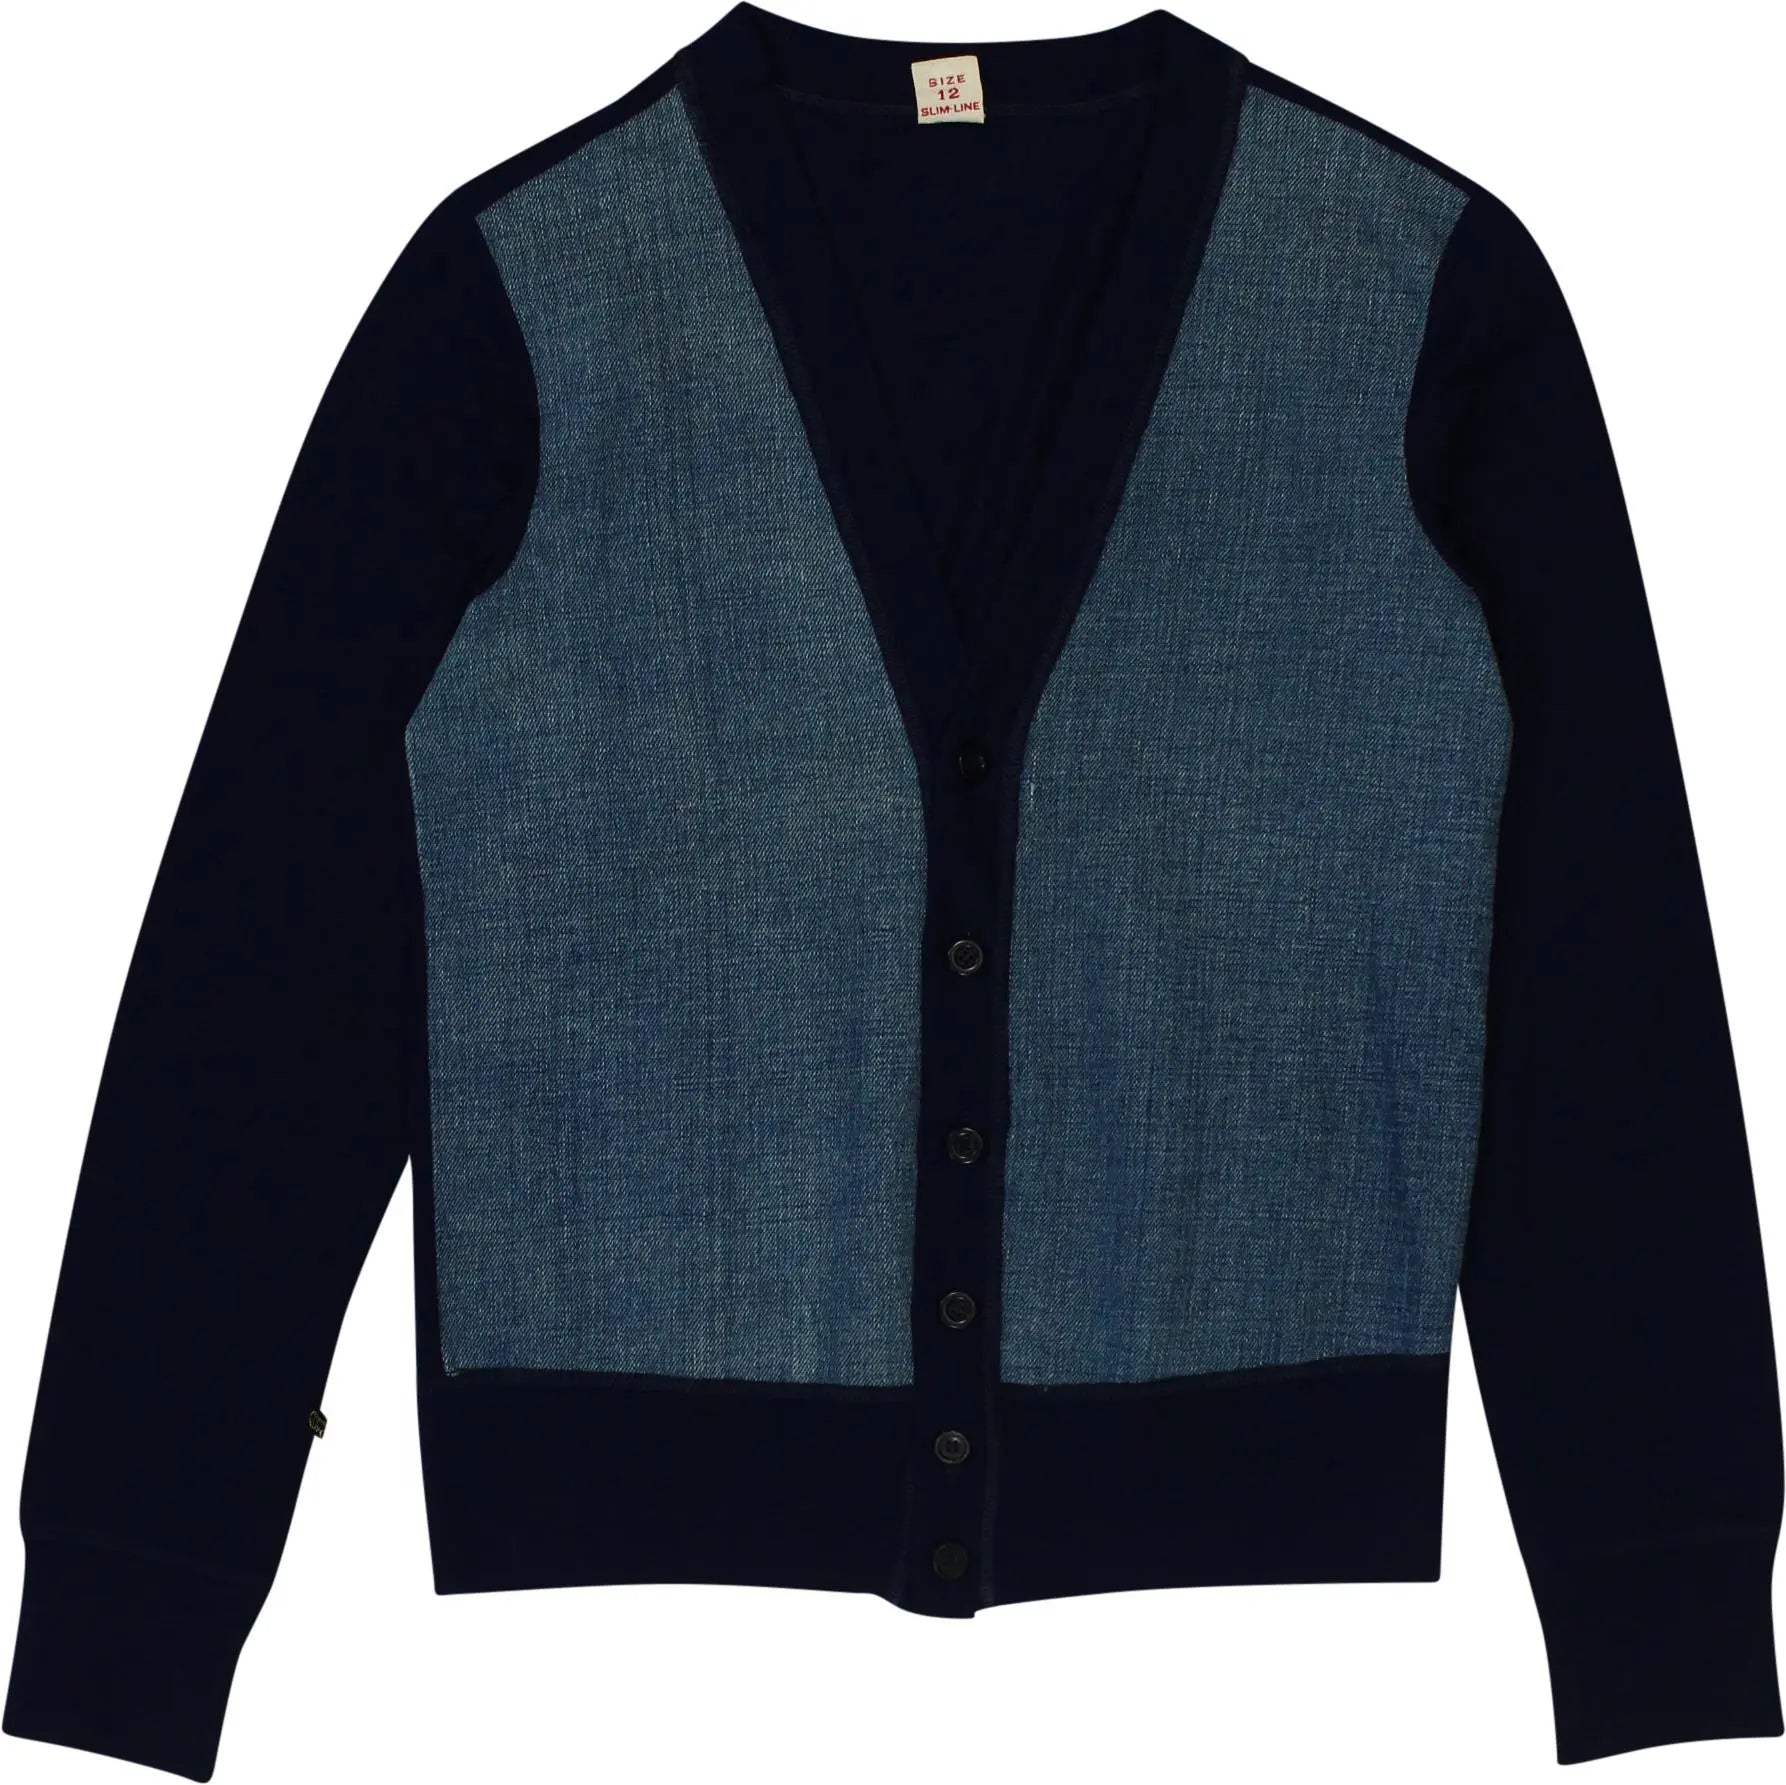 Unknown - Blue Cardigan- ThriftTale.com - Vintage and second handclothing